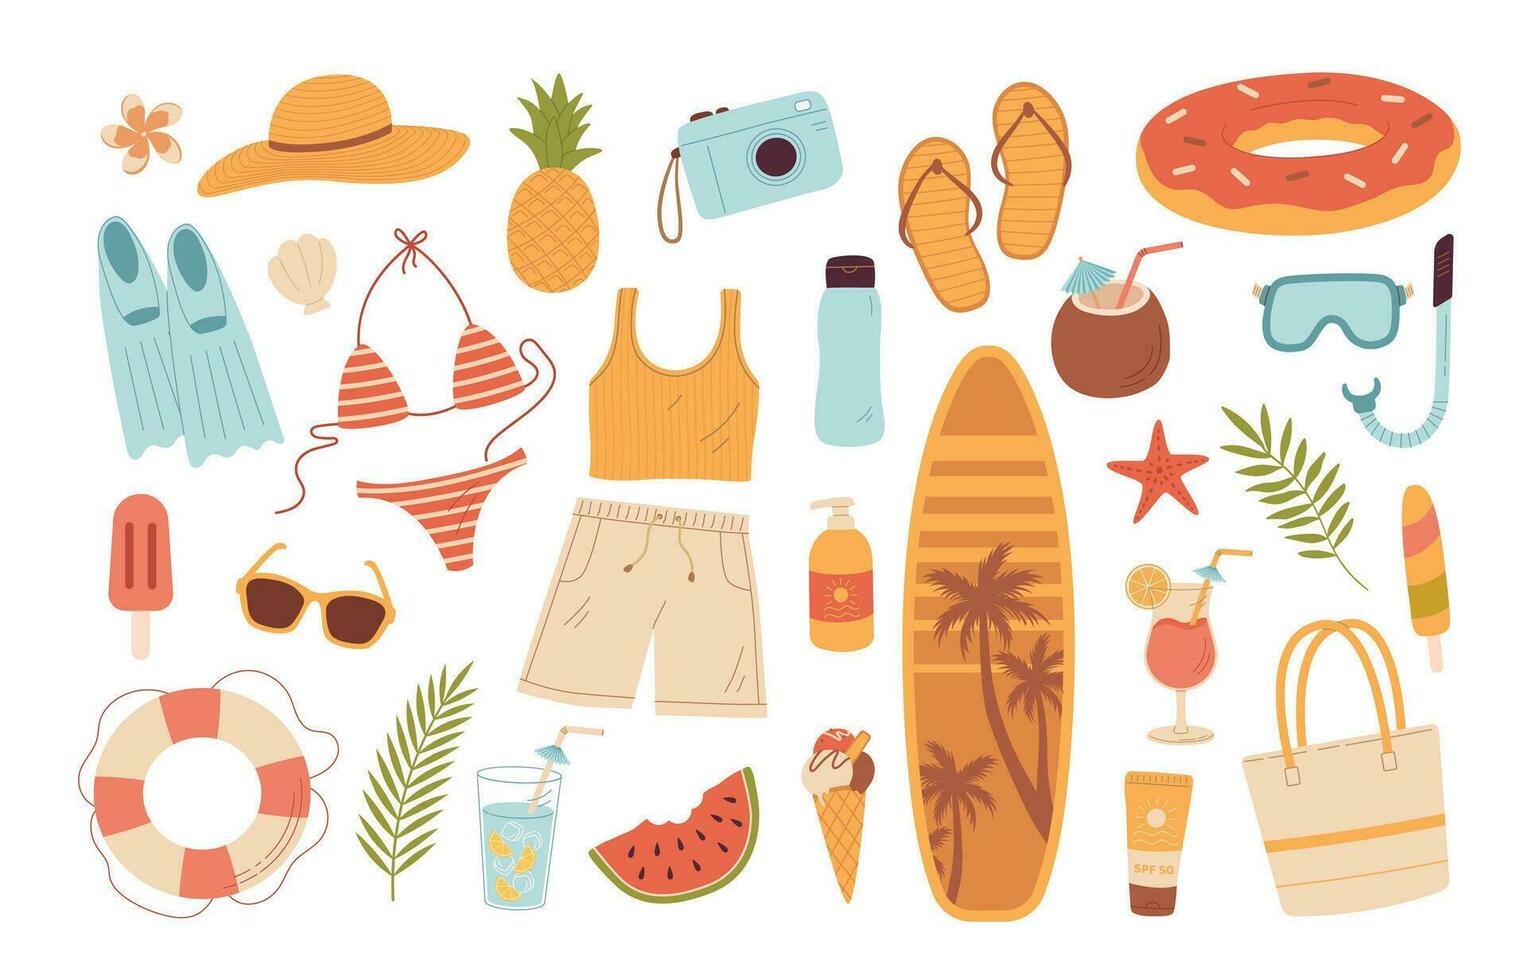 Cartoon summer beach stuff vector illustration. Summertime items. Vacation accessory for sea holidays. Surfboard, snorkeling mask, slippers, ice cream, fruits, sunglasses, cocktails, swimsuit, hat